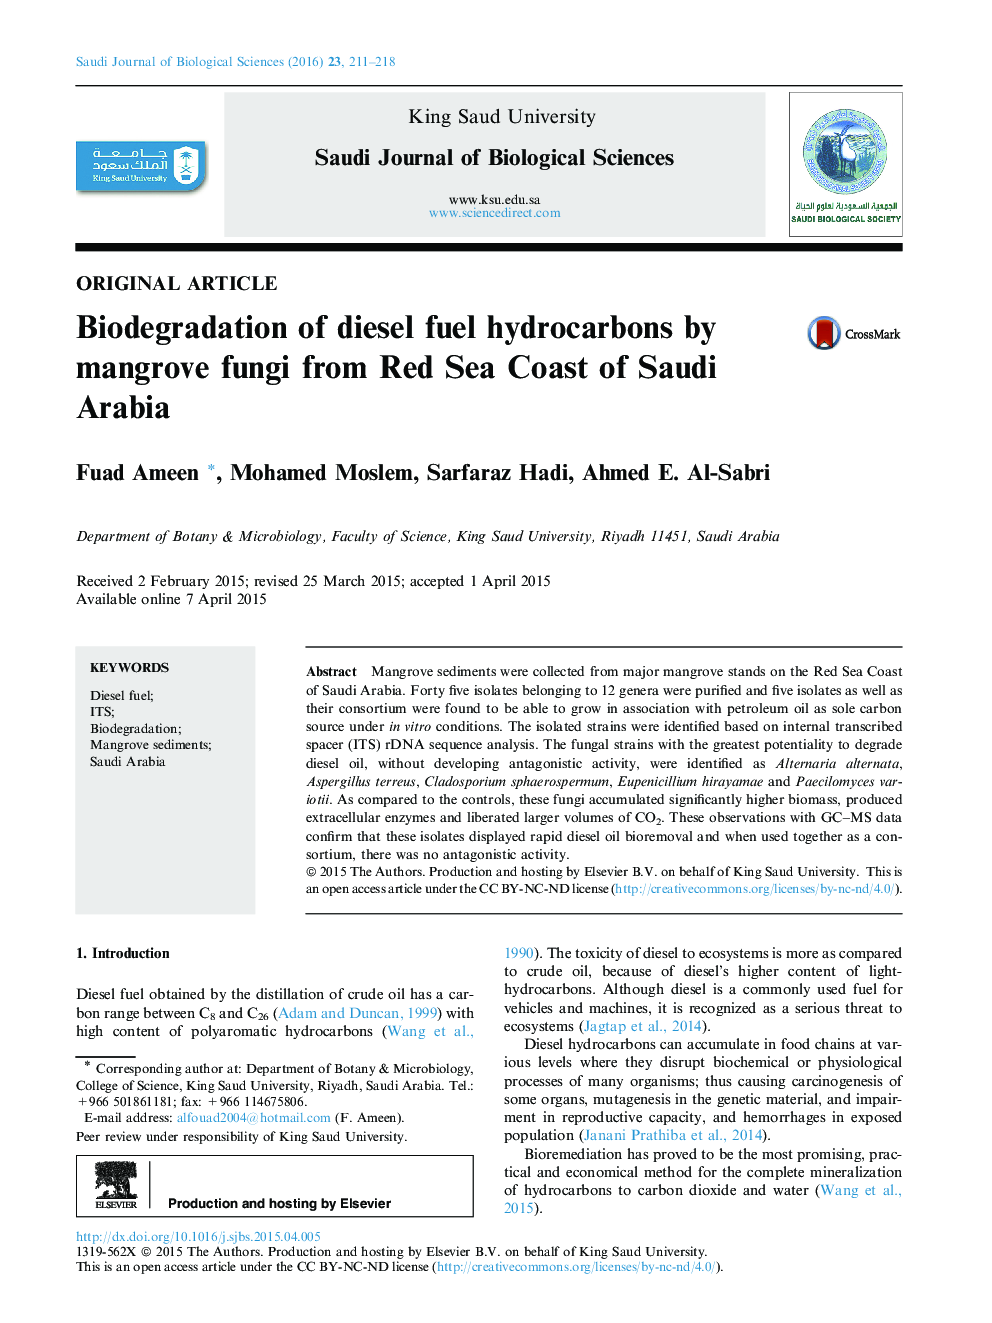 Biodegradation of diesel fuel hydrocarbons by mangrove fungi from Red Sea Coast of Saudi Arabia 